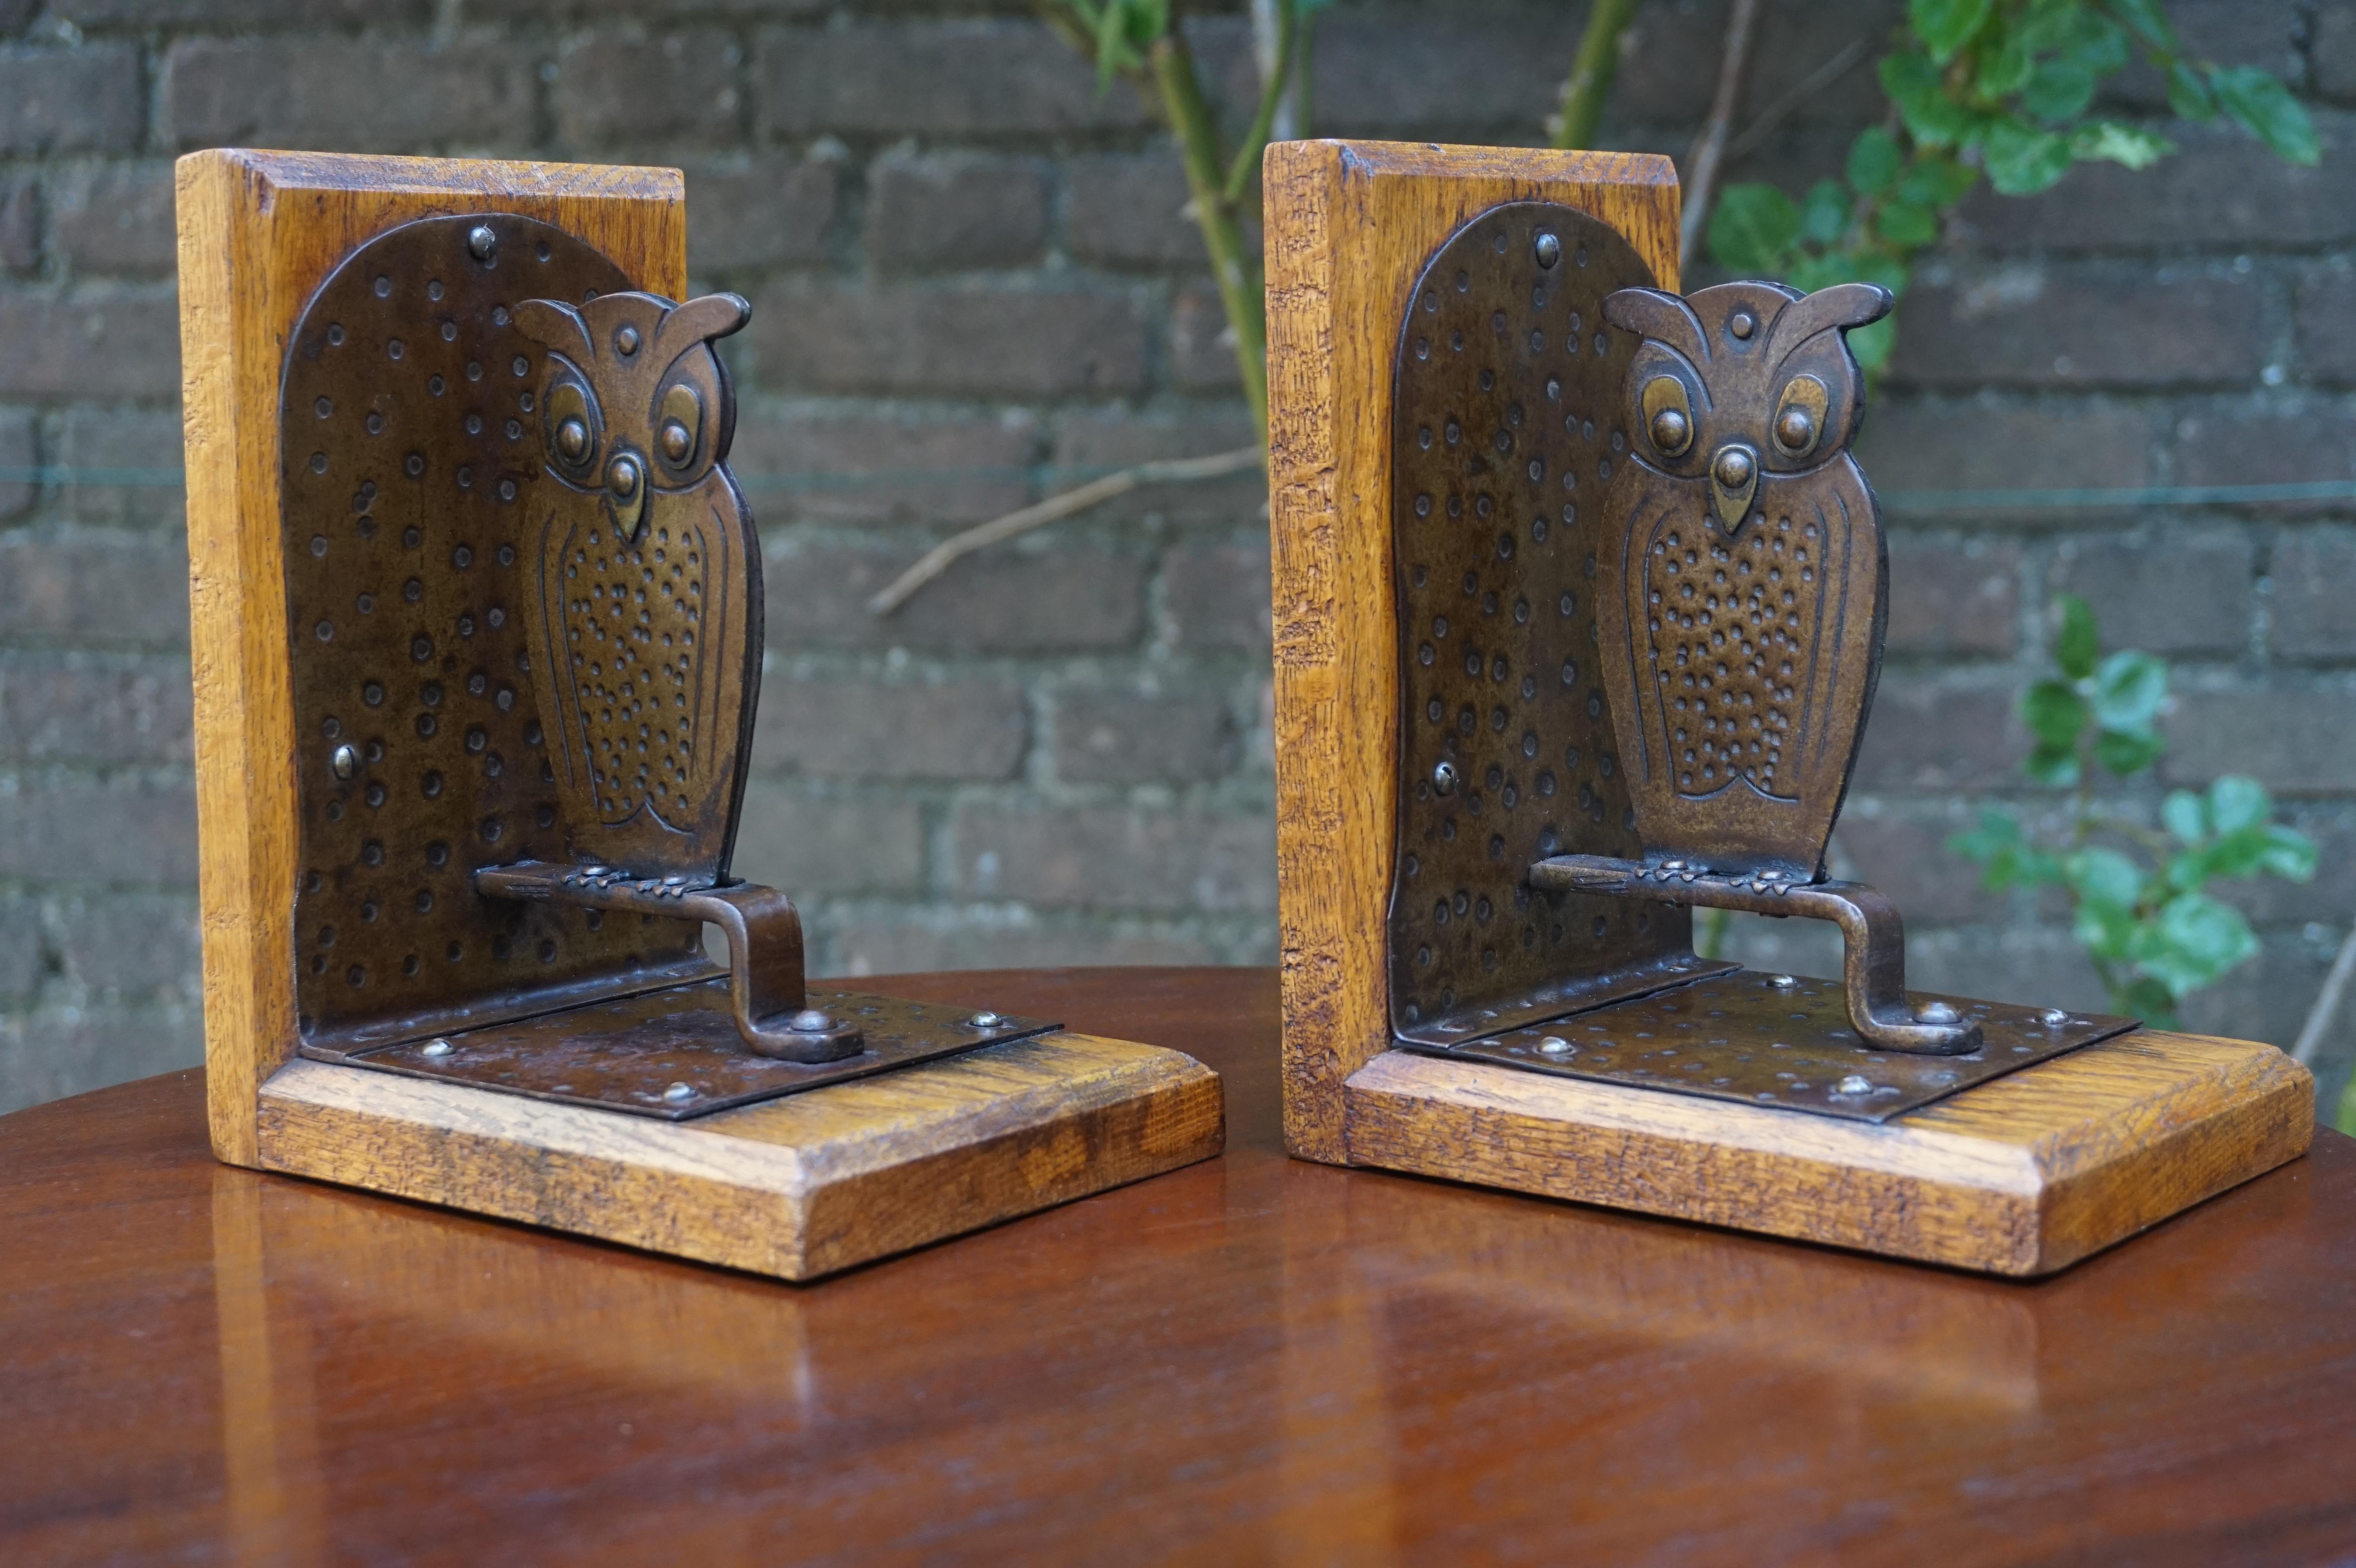 Pair of Hand Hammered Arts & Crafts Metal Owl Bookends by Goberg, Hugo Berger 7